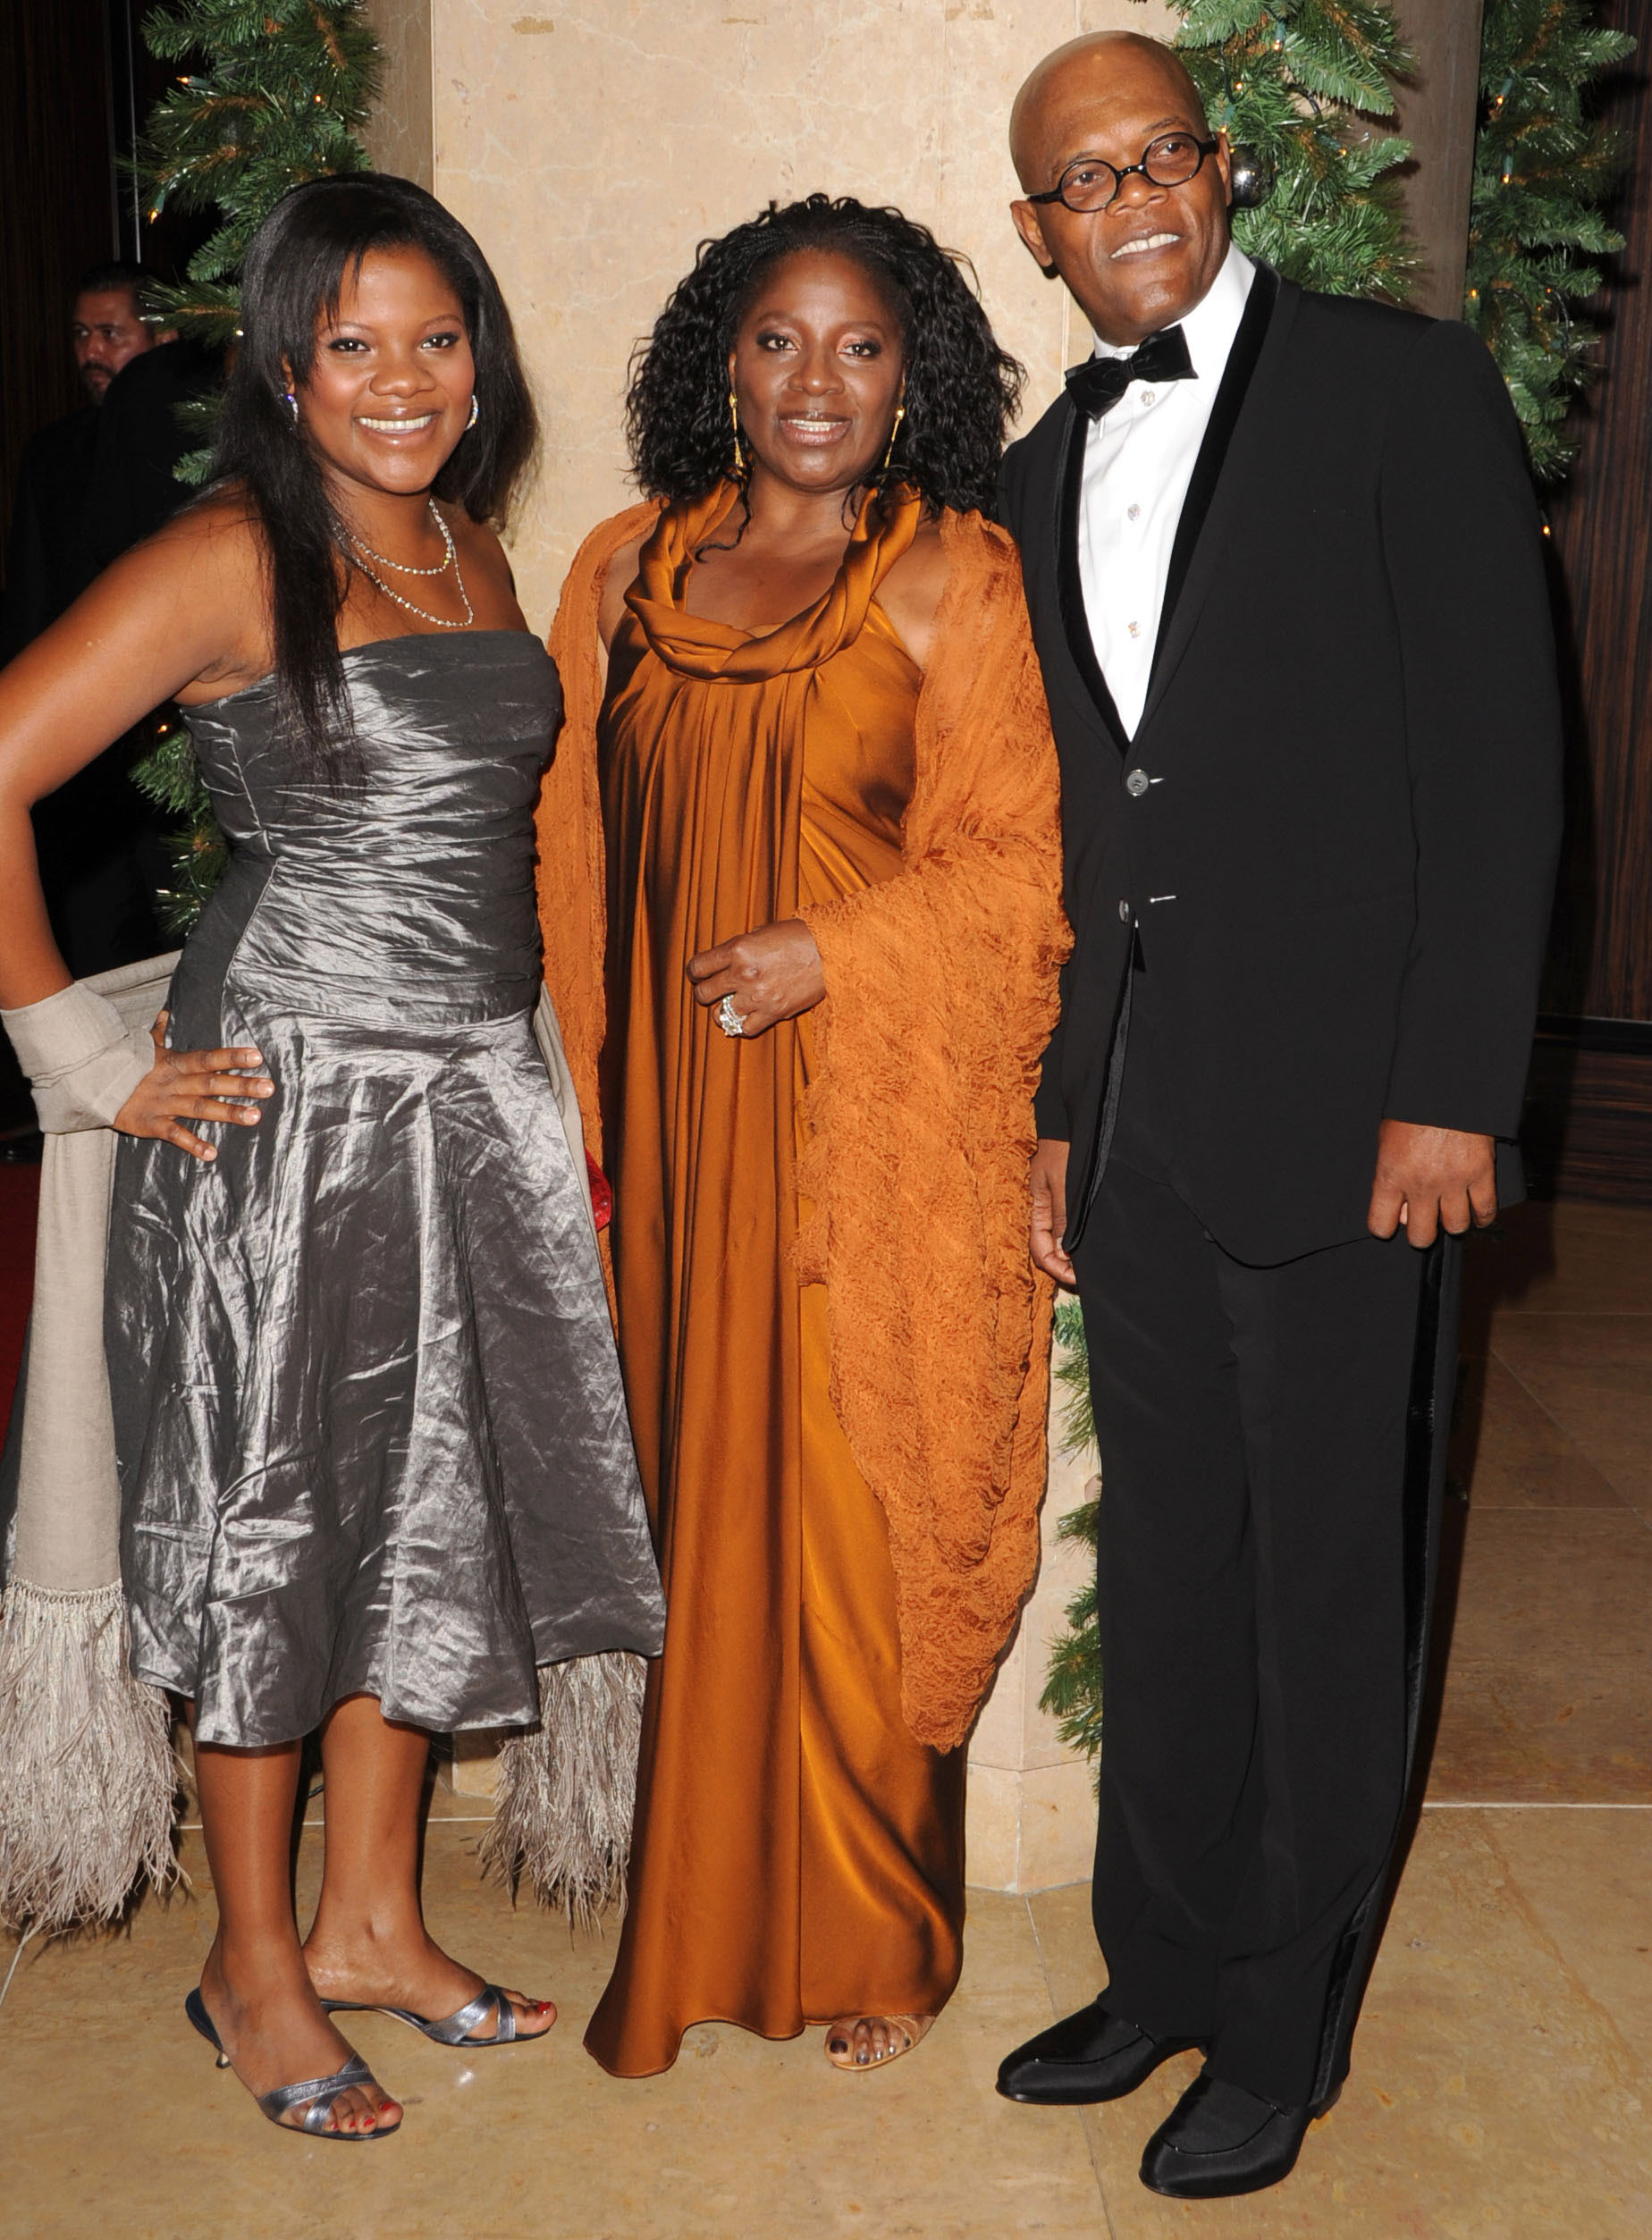 Samuel L. Jackson, his wife LaTanya Richardson, and daughter Zoe Jackson at the 23rd Annual American Cinematheque Awards on December 1, 2008 in Beverly Hills, California. | Source: Getty Images